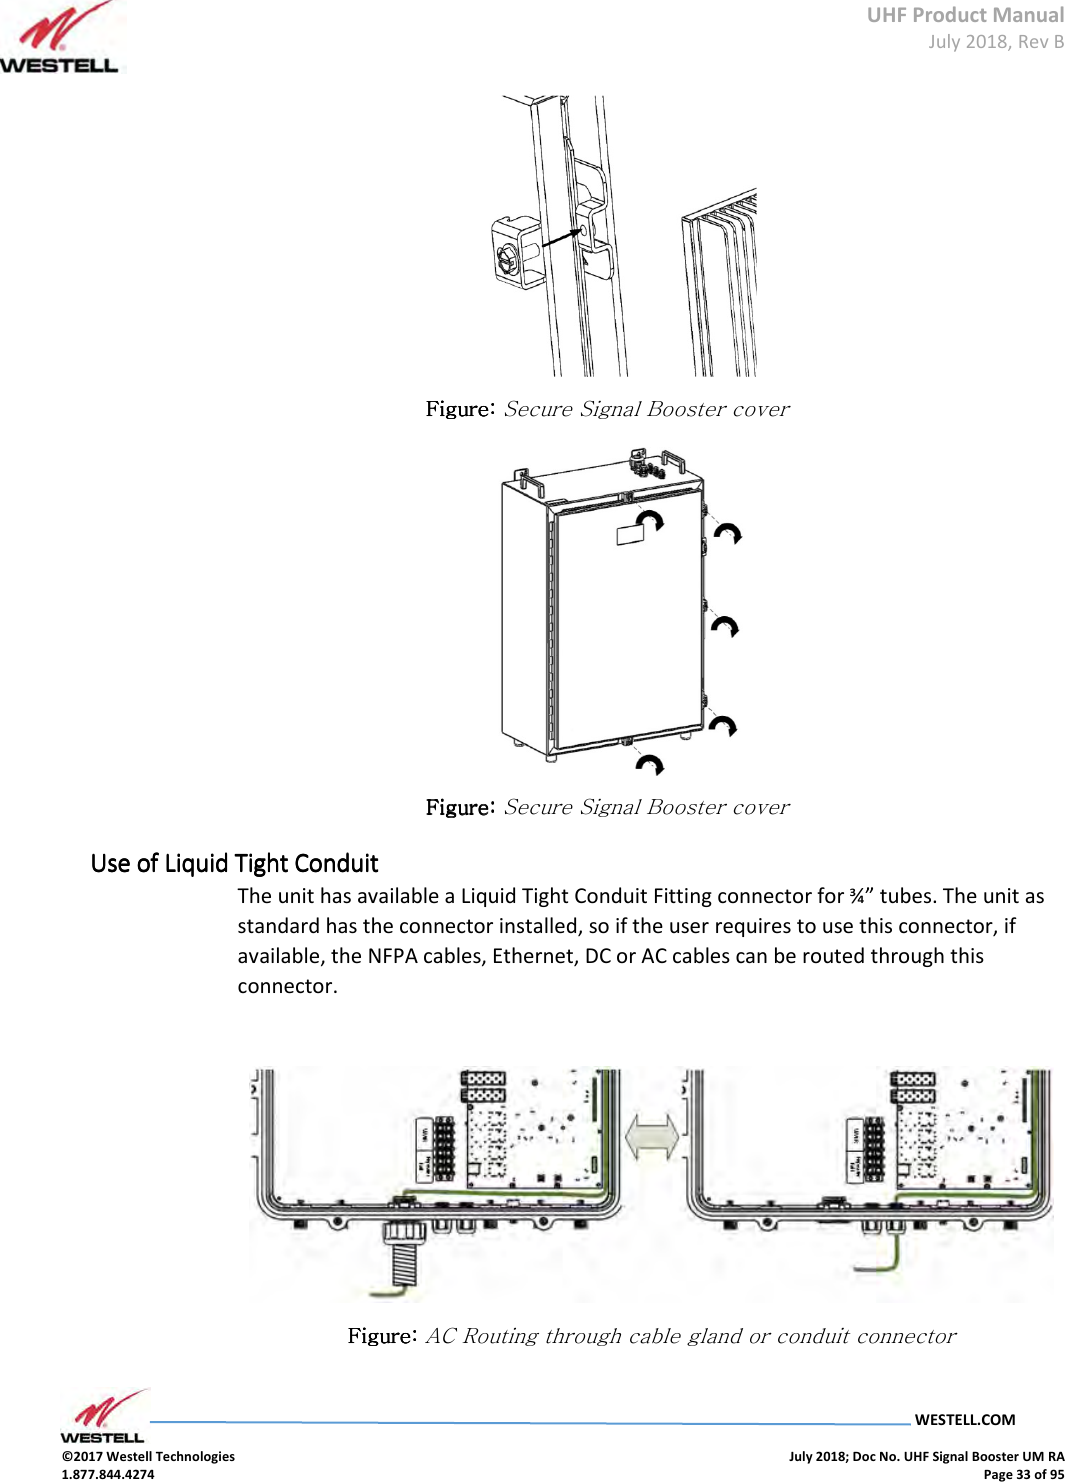 UHF Product Manual July 2018, Rev B   WESTELL.COM  ©2017 Westell Technologies    July 2018; Doc No. UHF Signal Booster UM RA 1.877.844.4274    Page 33 of 95   Figure: Figure: Figure: Figure: Secure Signal Booster cover  Figure: Figure: Figure: Figure: Secure Signal Booster cover Use of Liquid Tight ConduitUse of Liquid Tight ConduitUse of Liquid Tight ConduitUse of Liquid Tight Conduit    The unit has available a Liquid Tight Conduit Fitting connector for ¾” tubes. The unit as standard has the connector installed, so if the user requires to use this connector, if available, the NFPA cables, Ethernet, DC or AC cables can be routed through this connector.   Figure: Figure: Figure: Figure: AC Routing through cable gland or conduit connector  